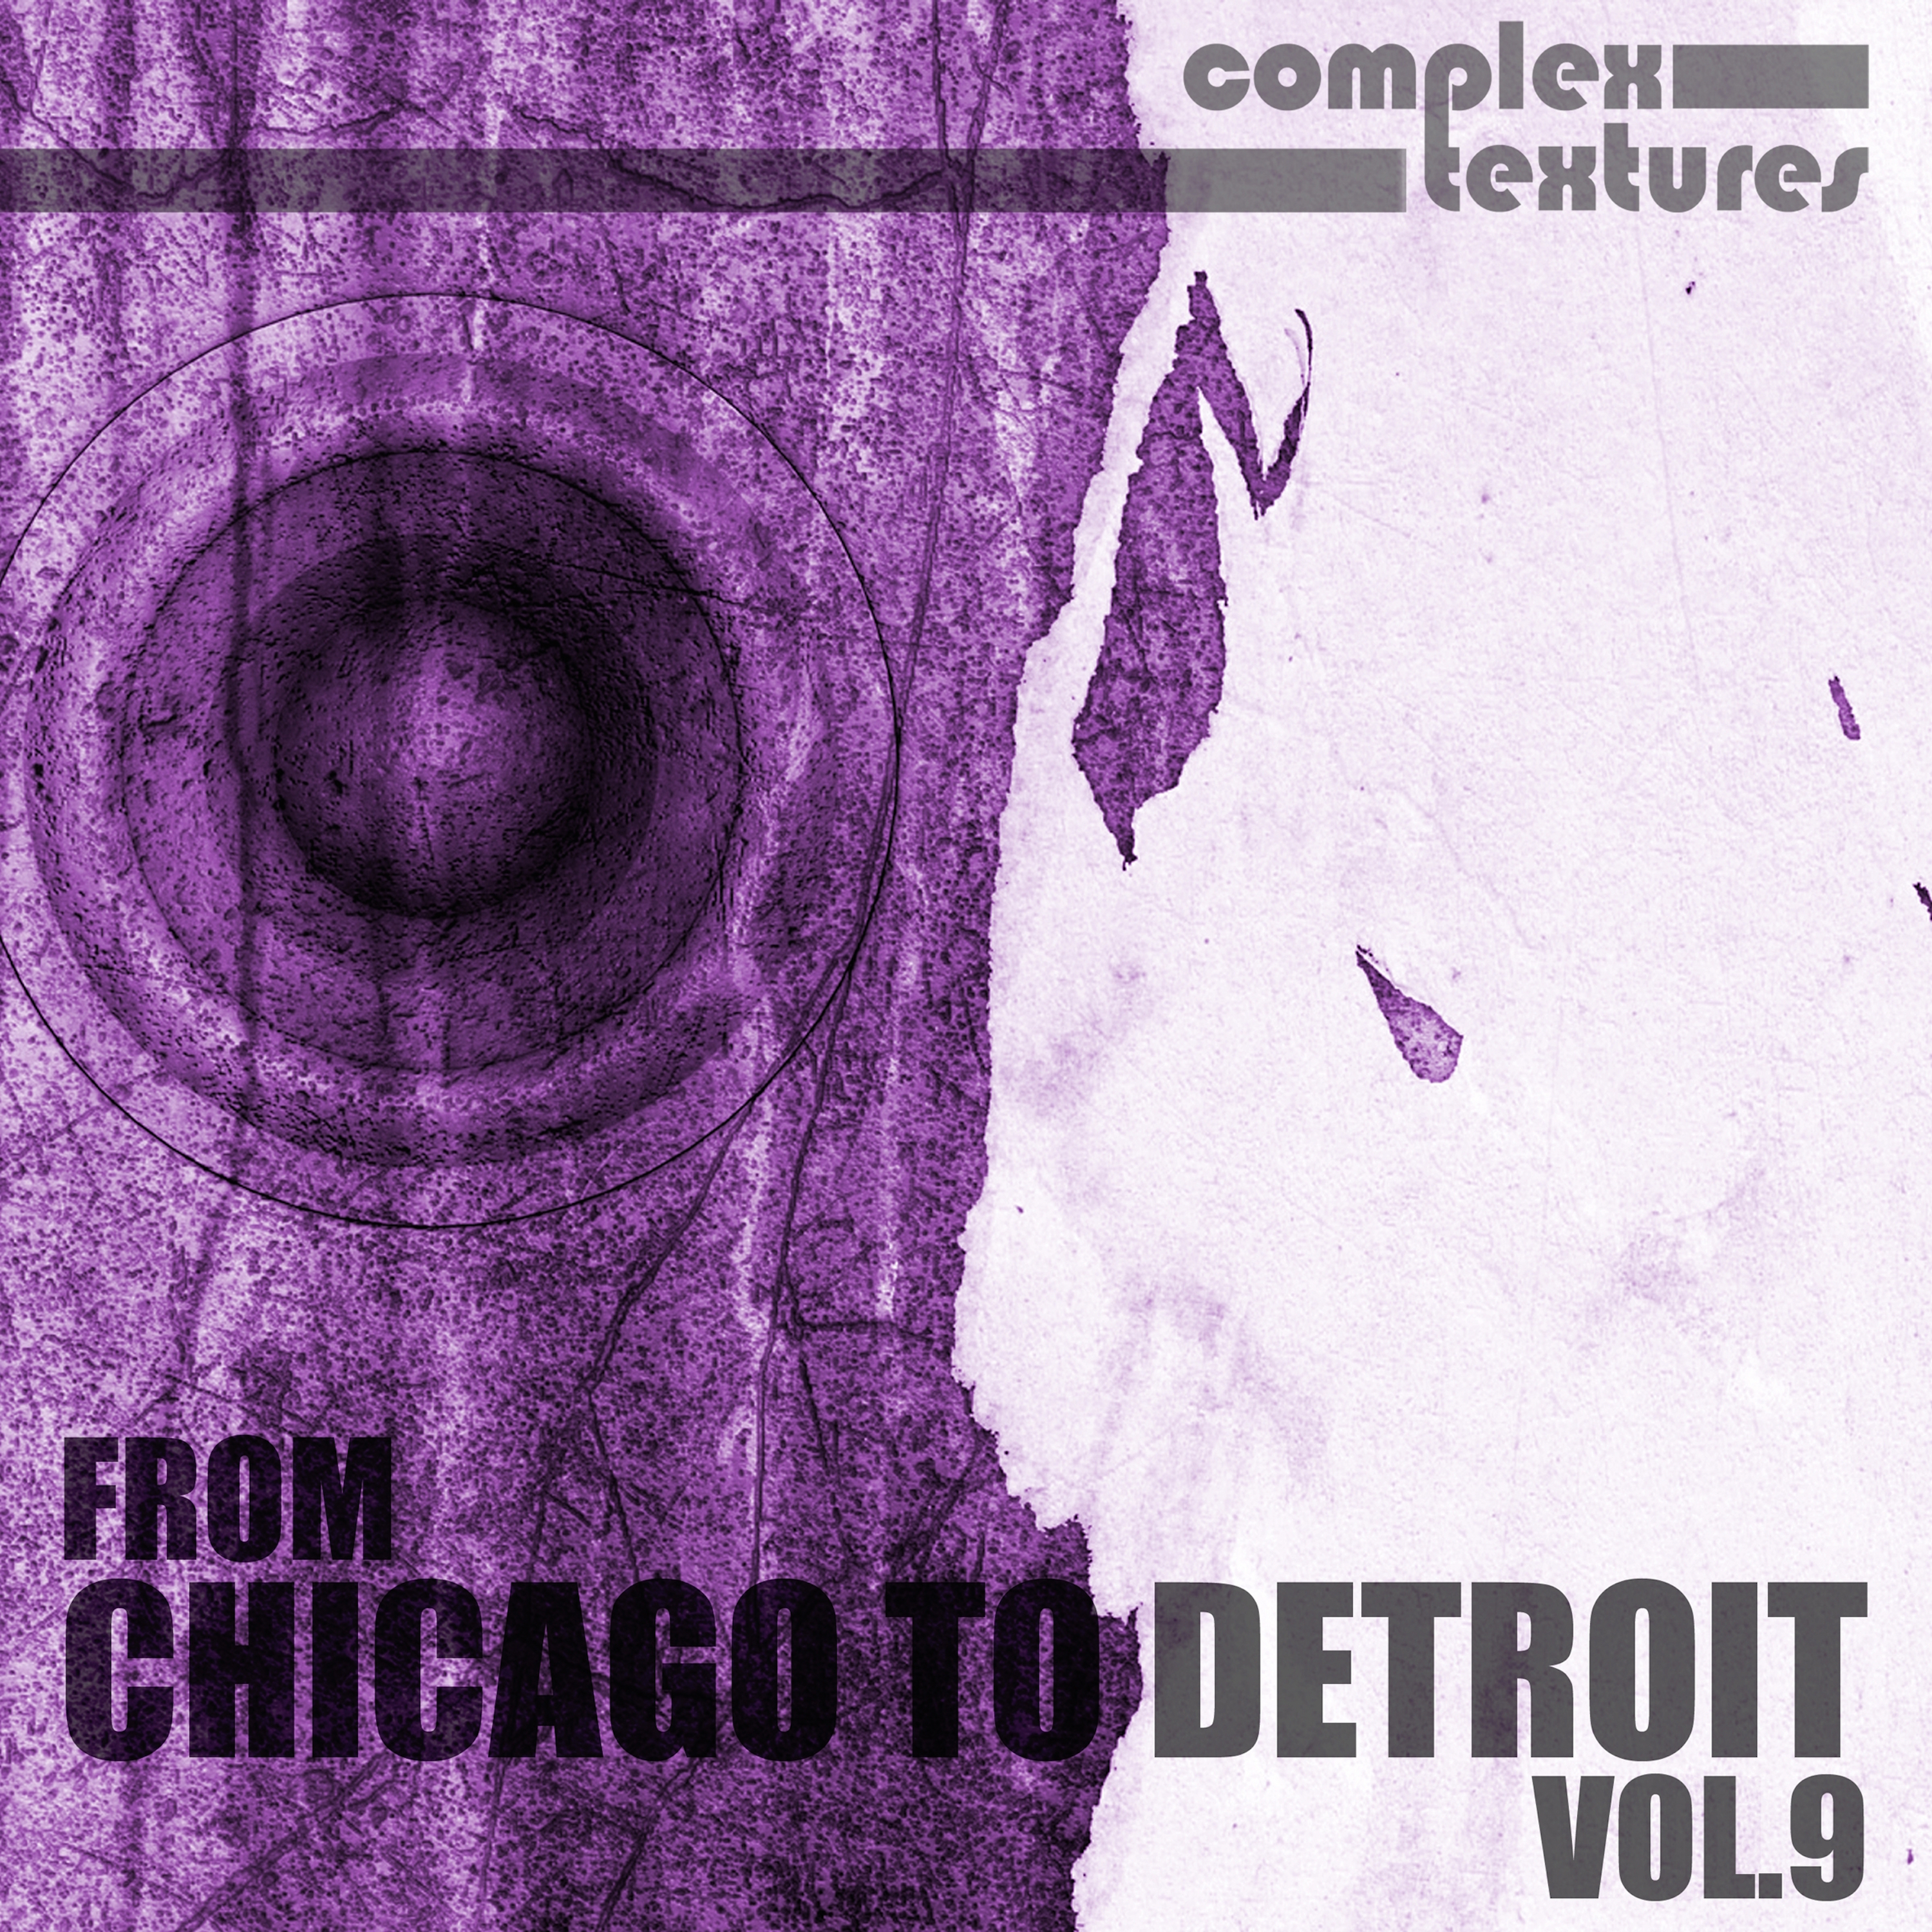 From Chicago to Detroit, Vol. 9